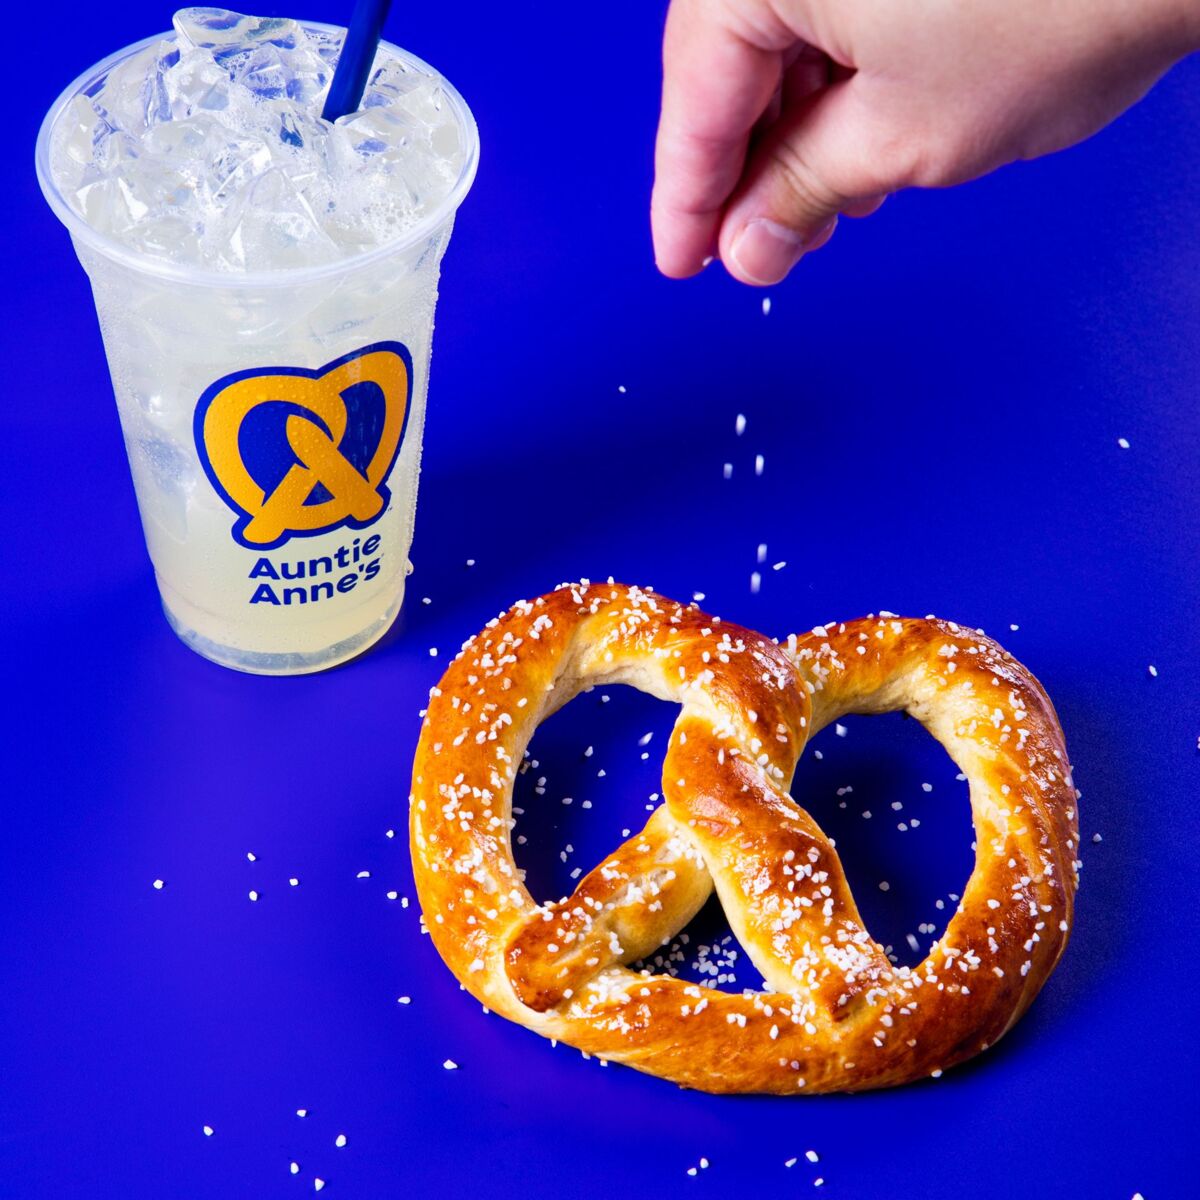 Auntie Anne's Giving Away Free Pretzels for National Pretzel Day